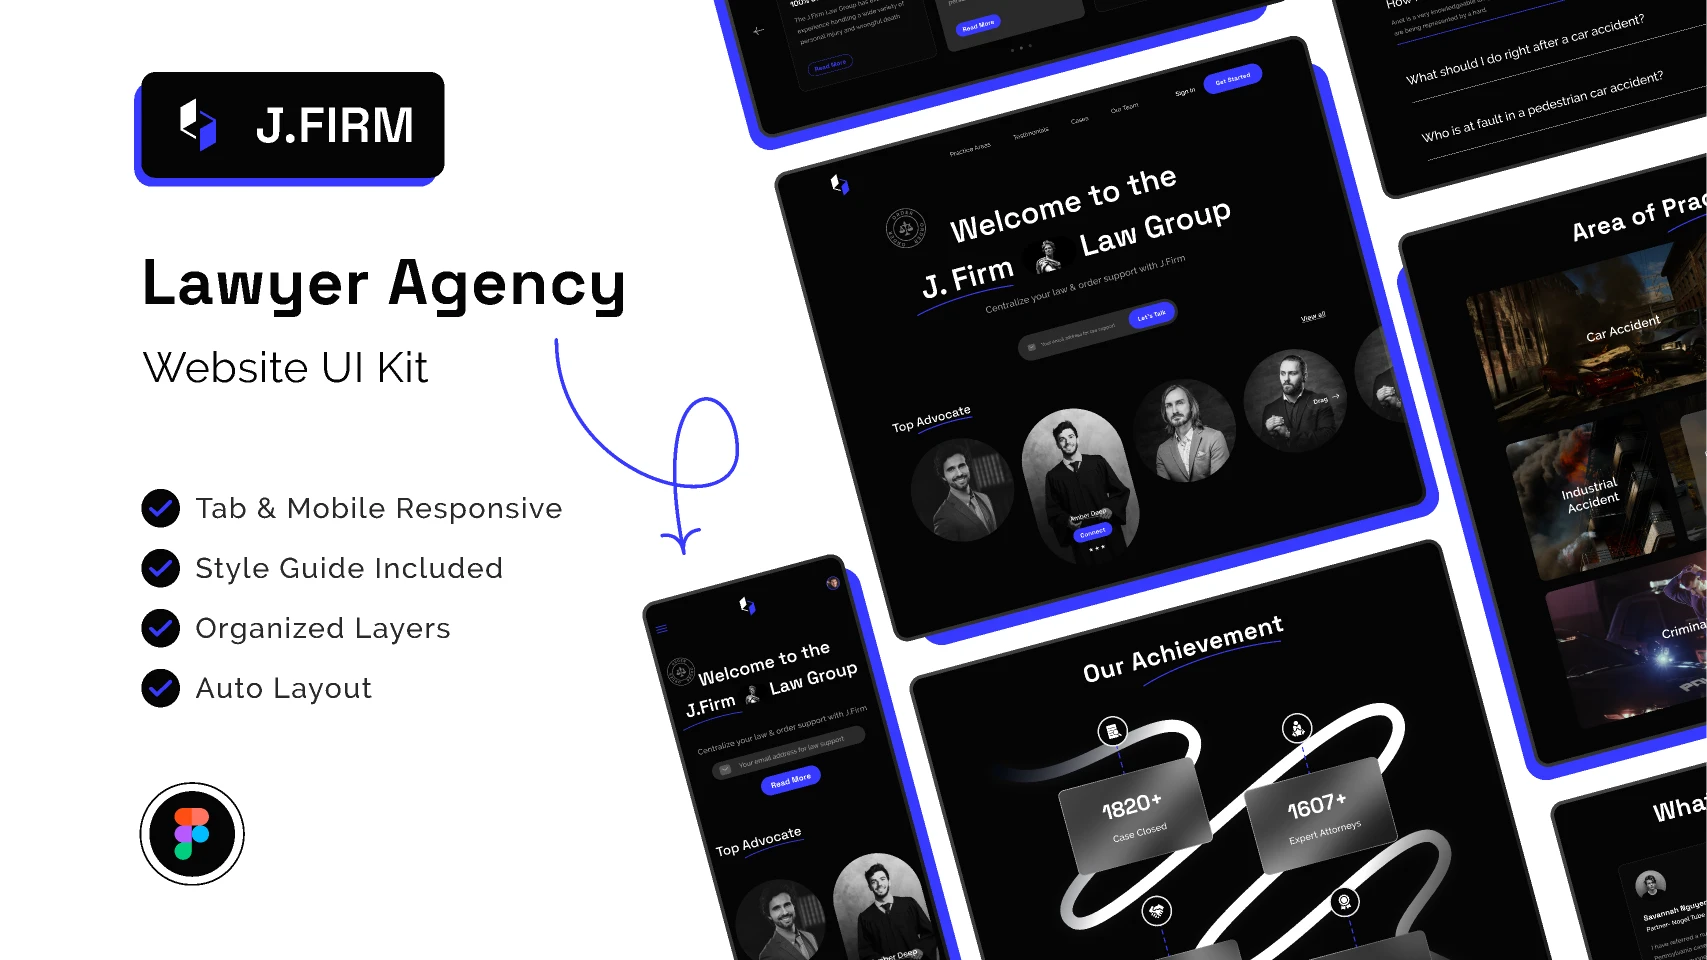 Lawyer Agency Website UI Kit for Figma and Adobe XD